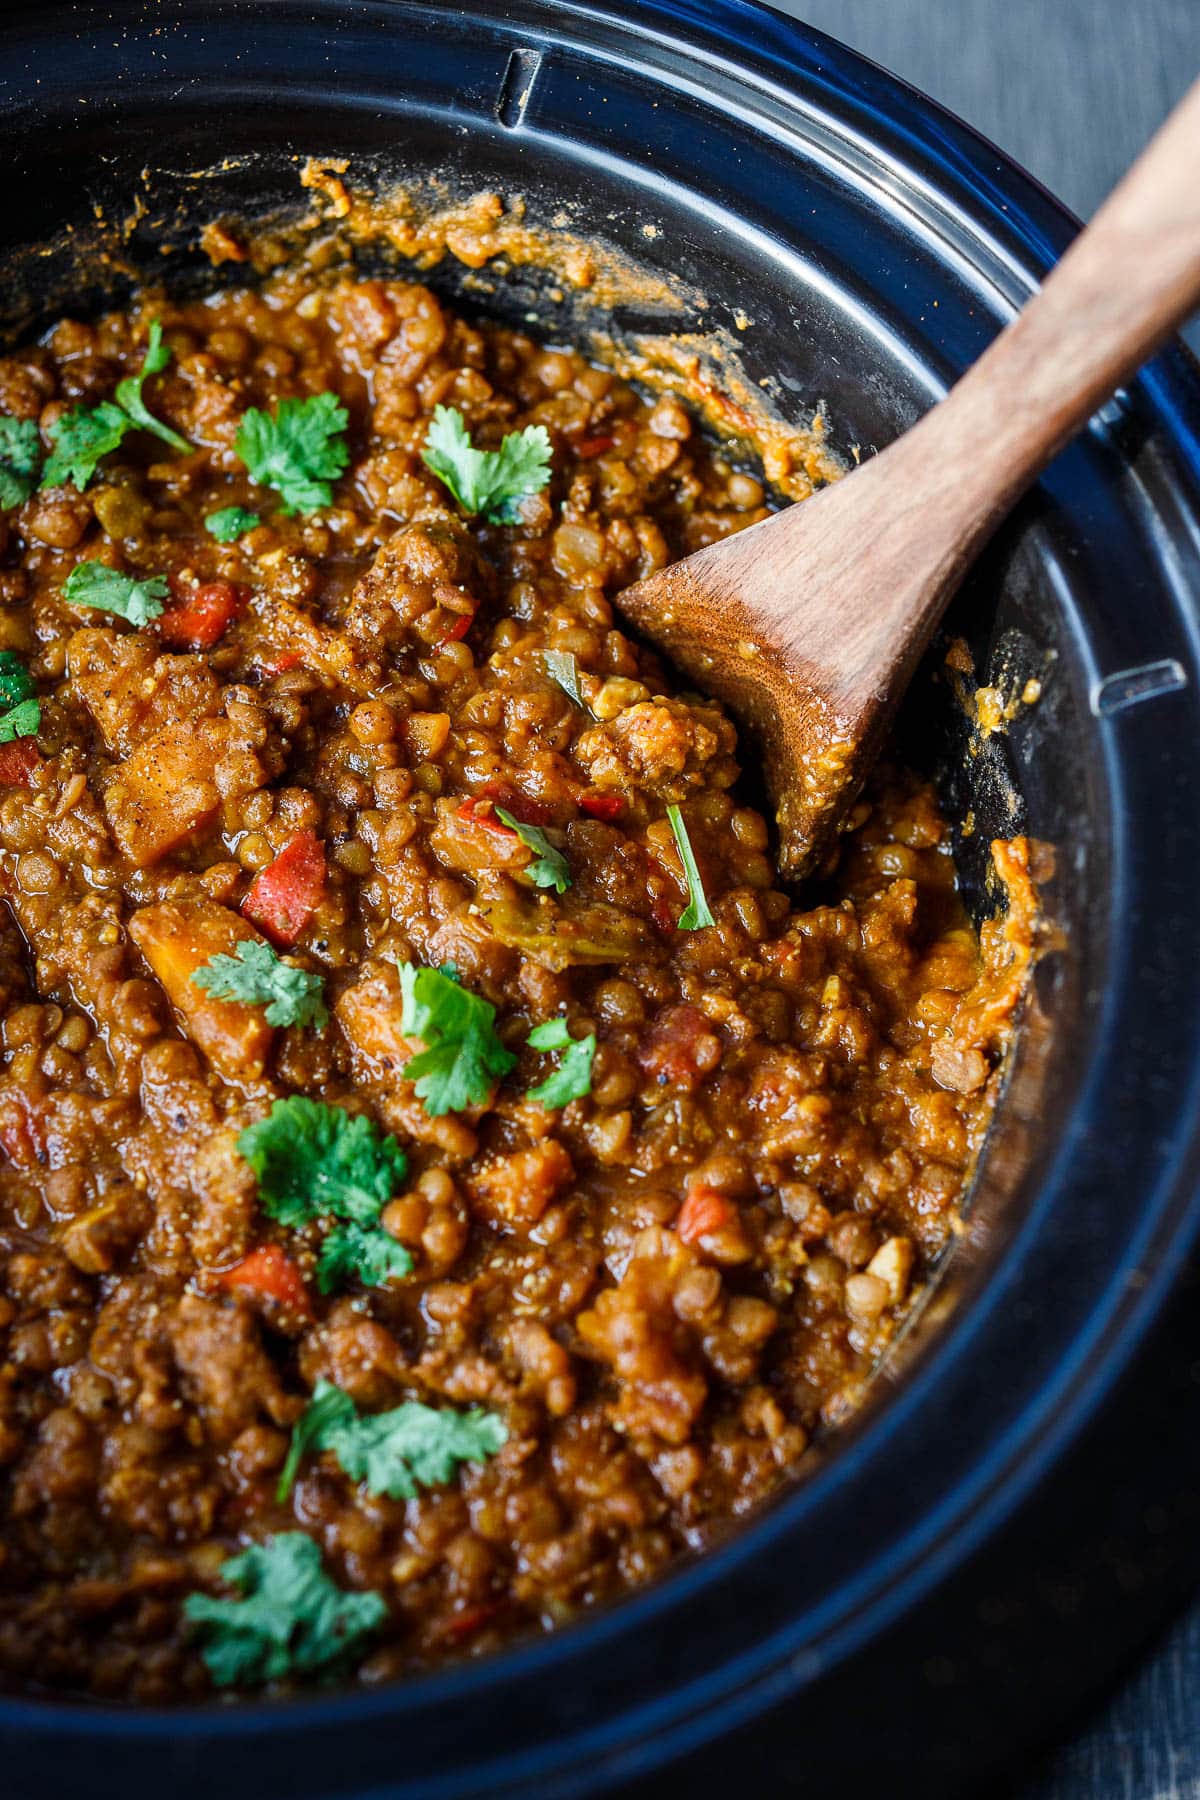 Lentil Chili with Chorizo cooked in a slow cooker/ crockpot.